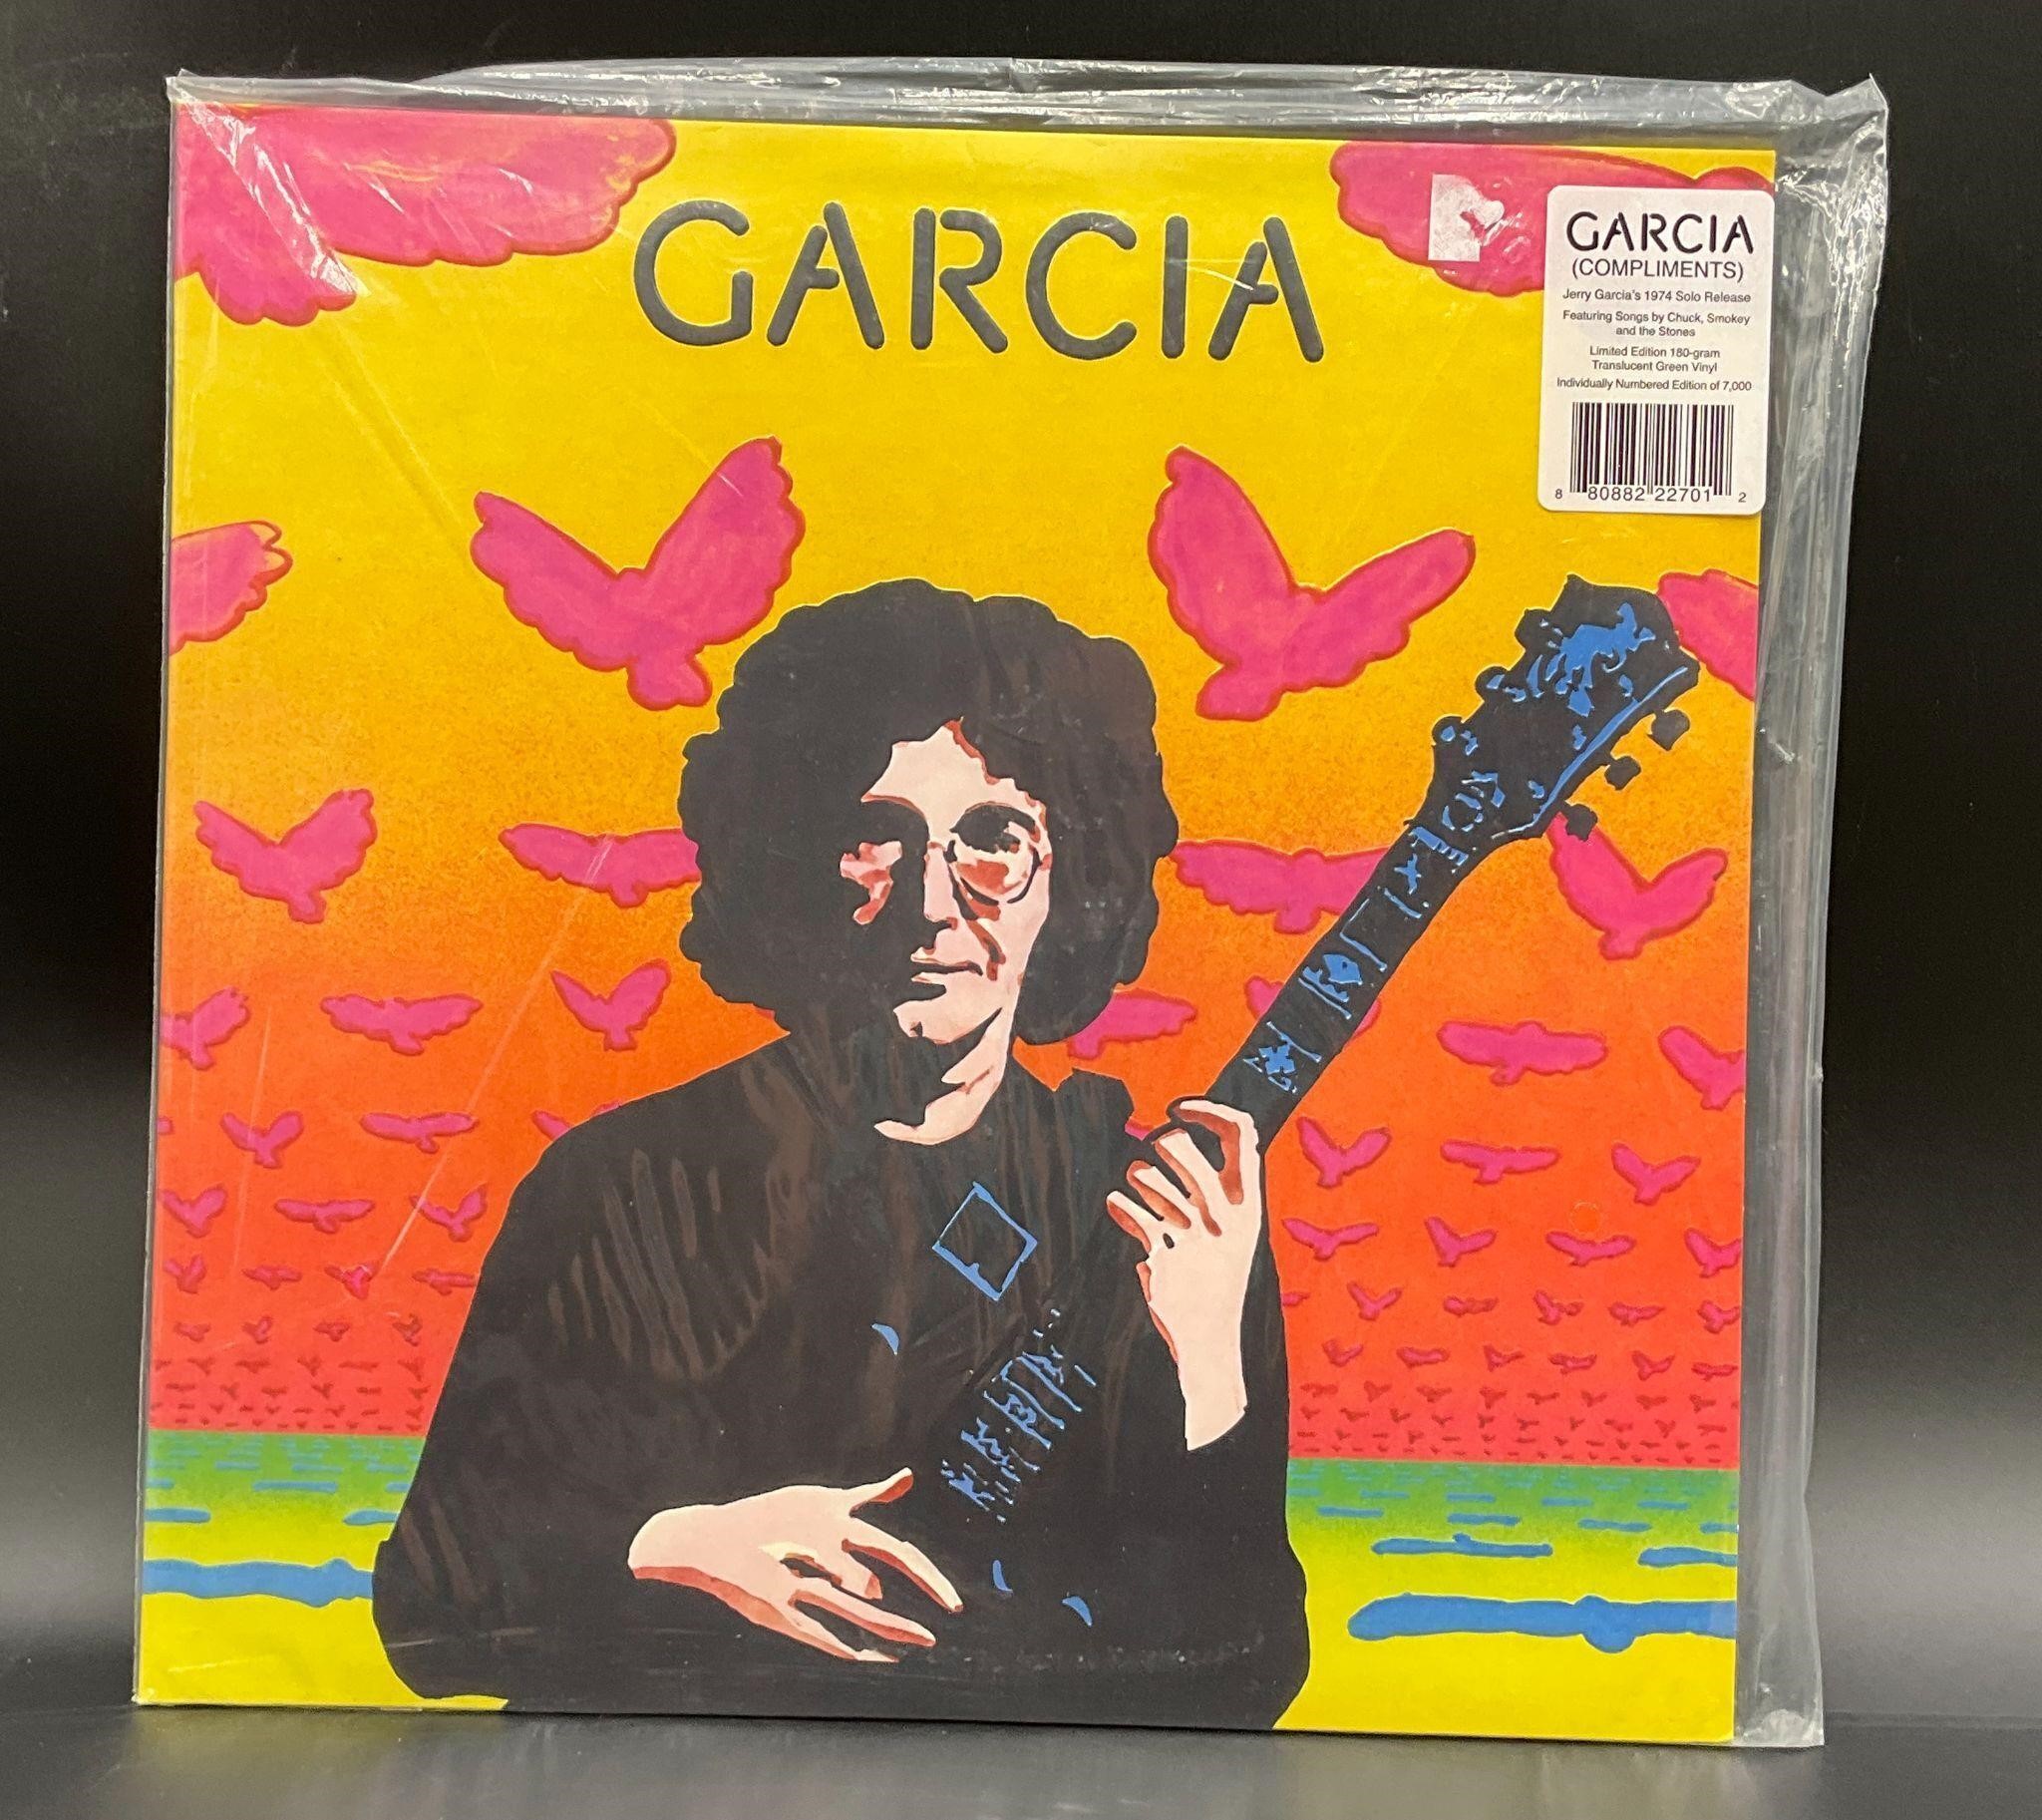 Sealed 2015 Jerry Garcia "Garcia (Compliments)"